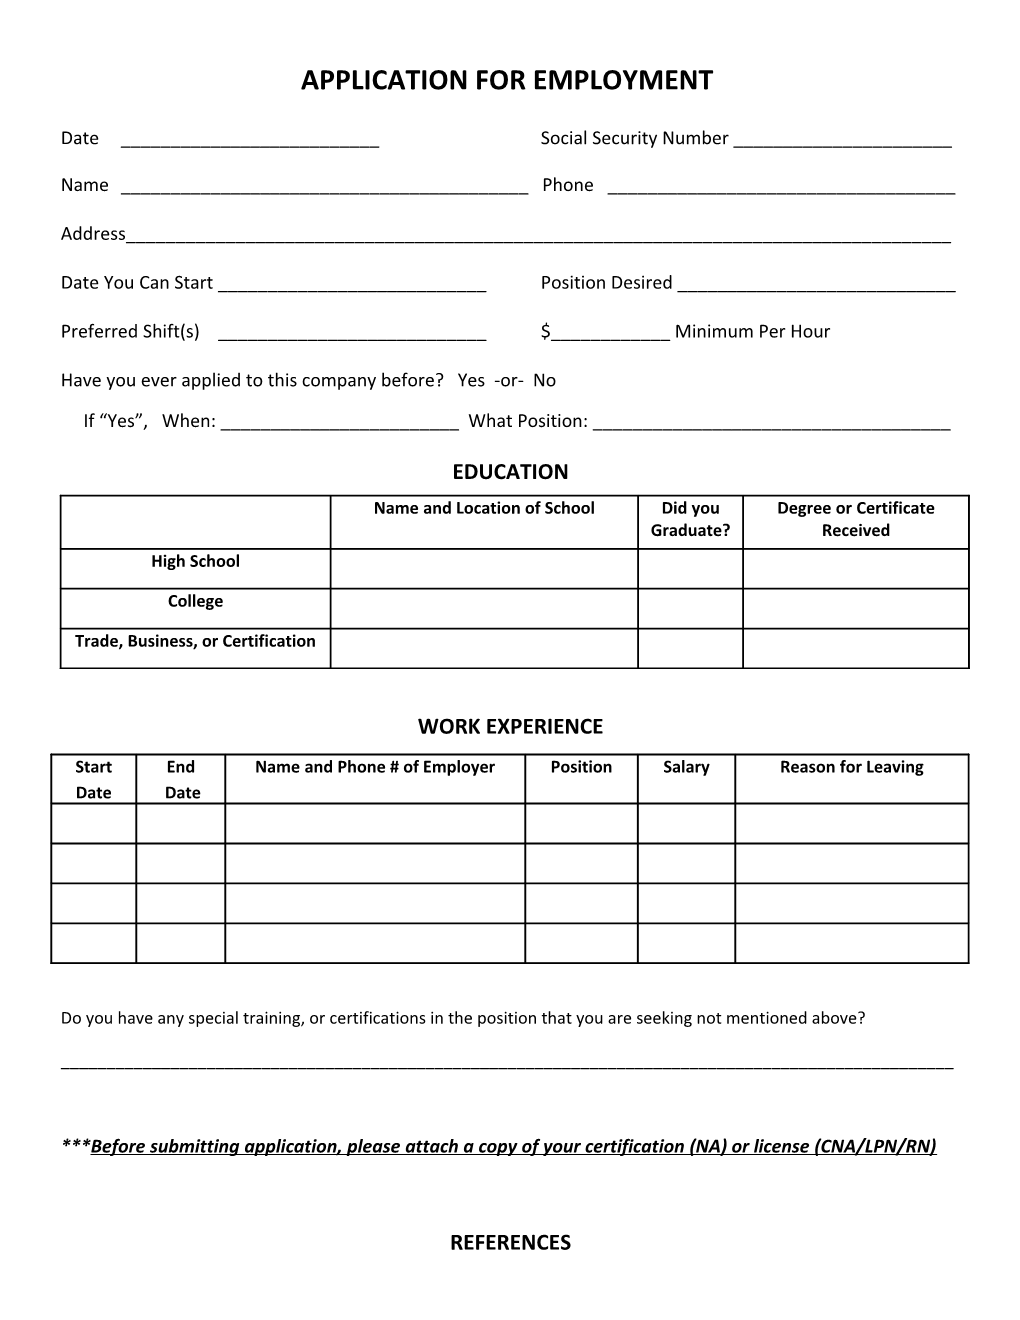 Application for Employment s92